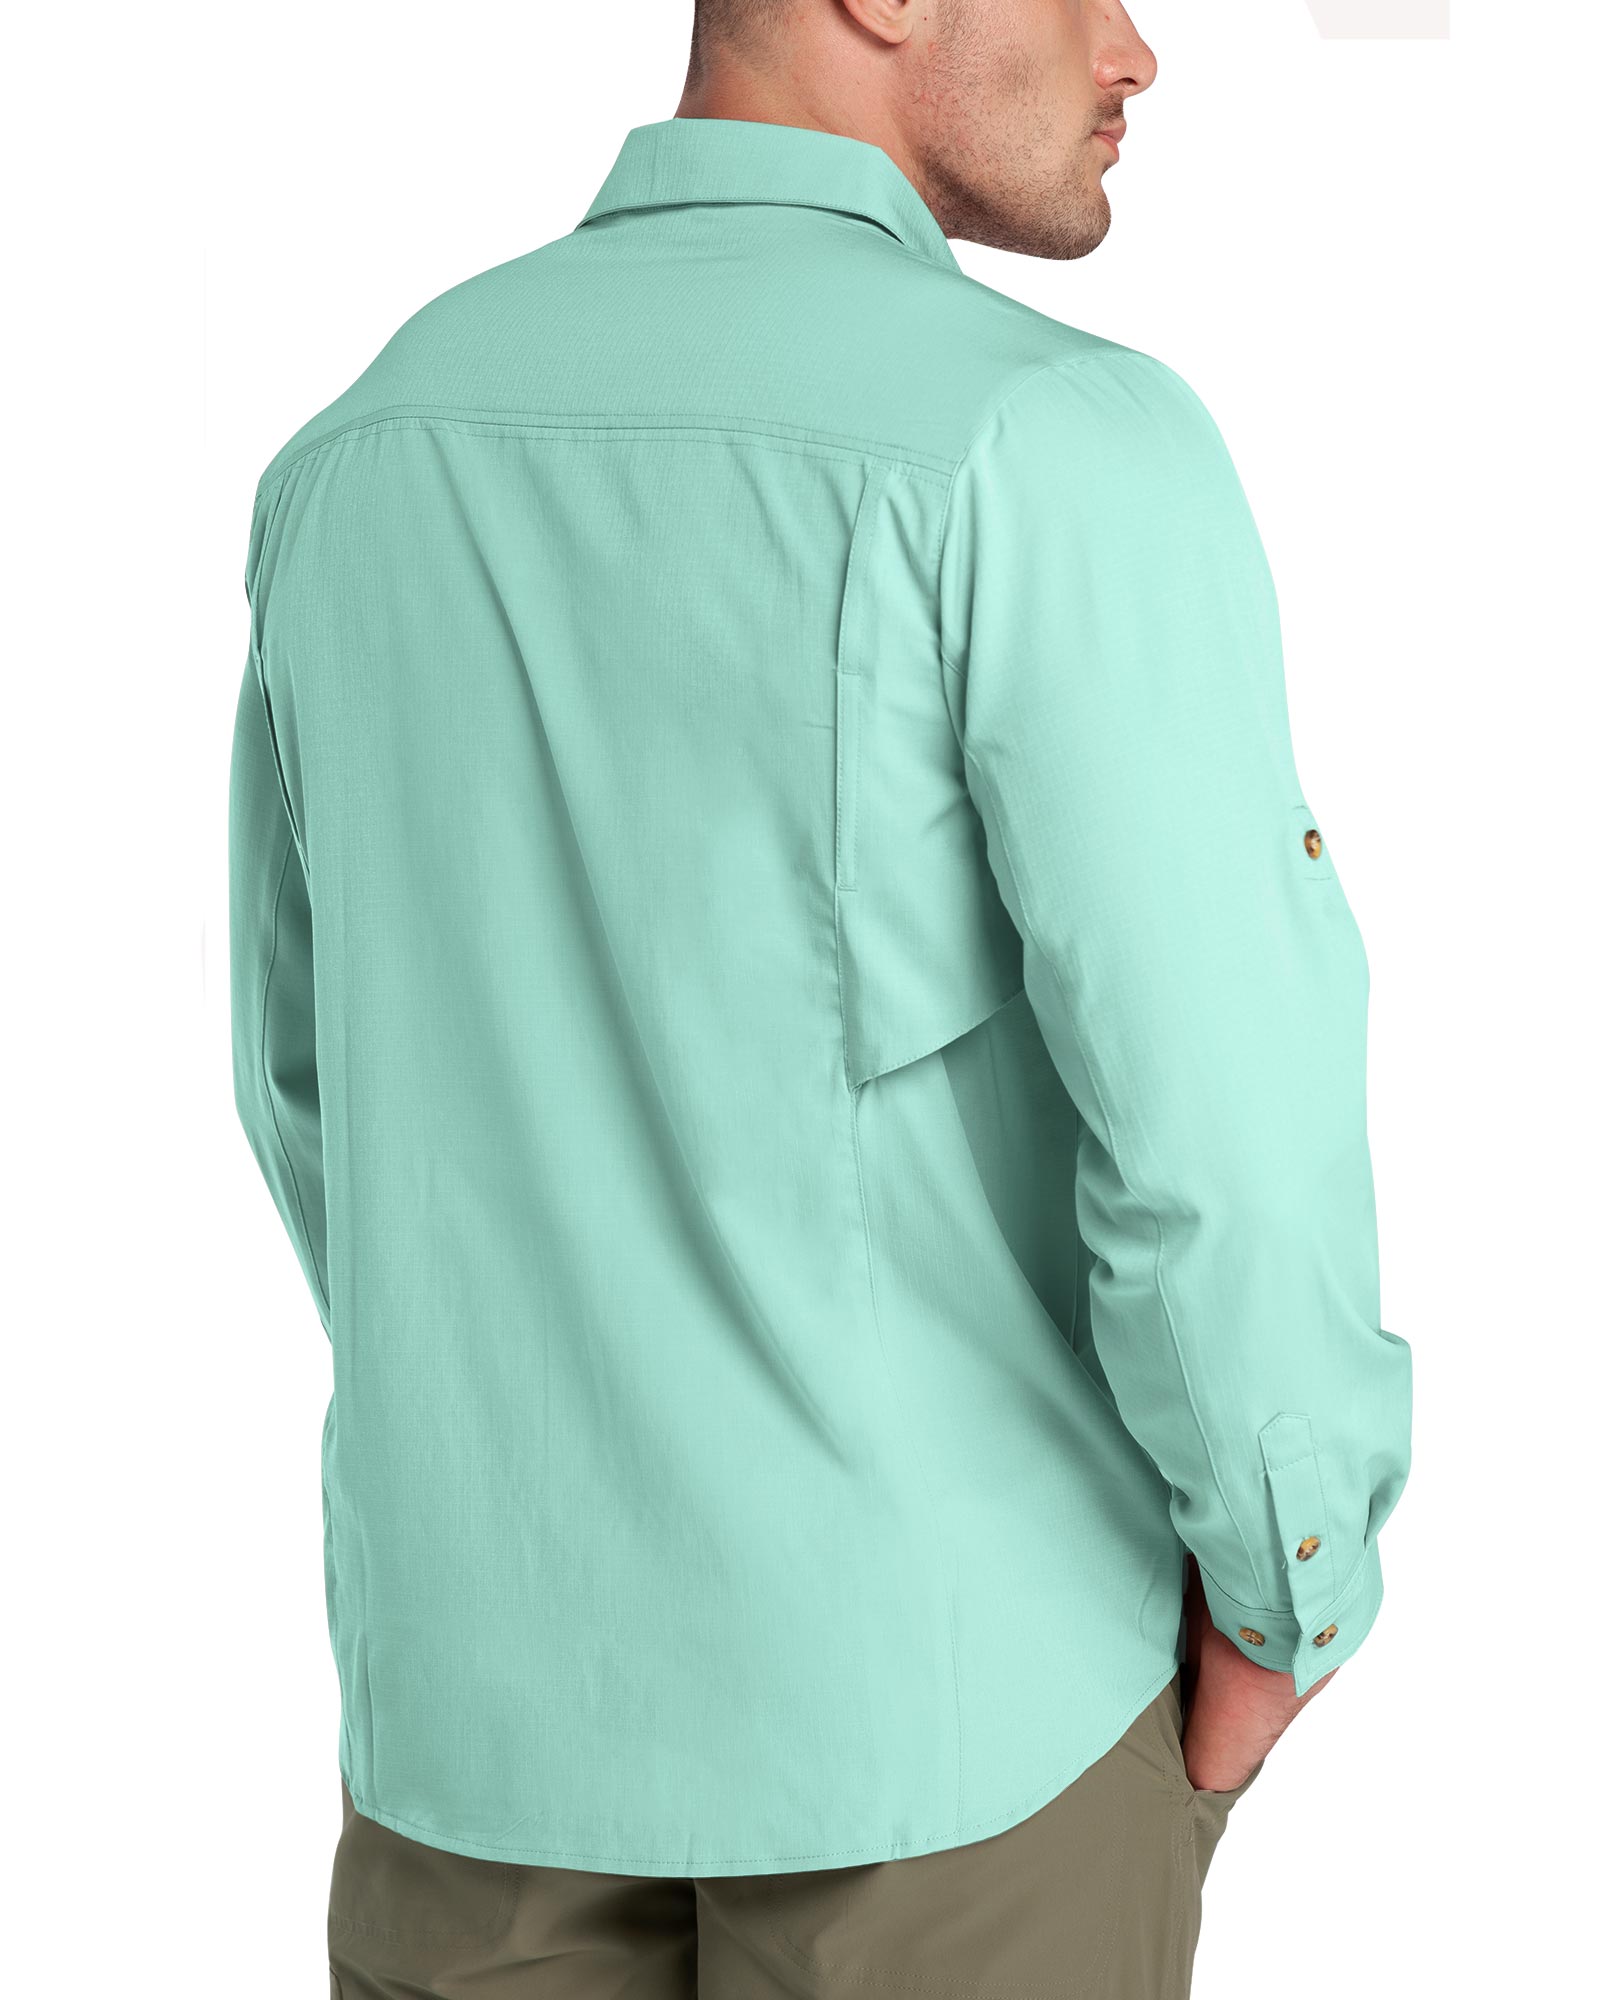 Men's UPF 50+ Breathable Mesh Lined Vents Adjustable Sleeve Shirt – 33,000ft